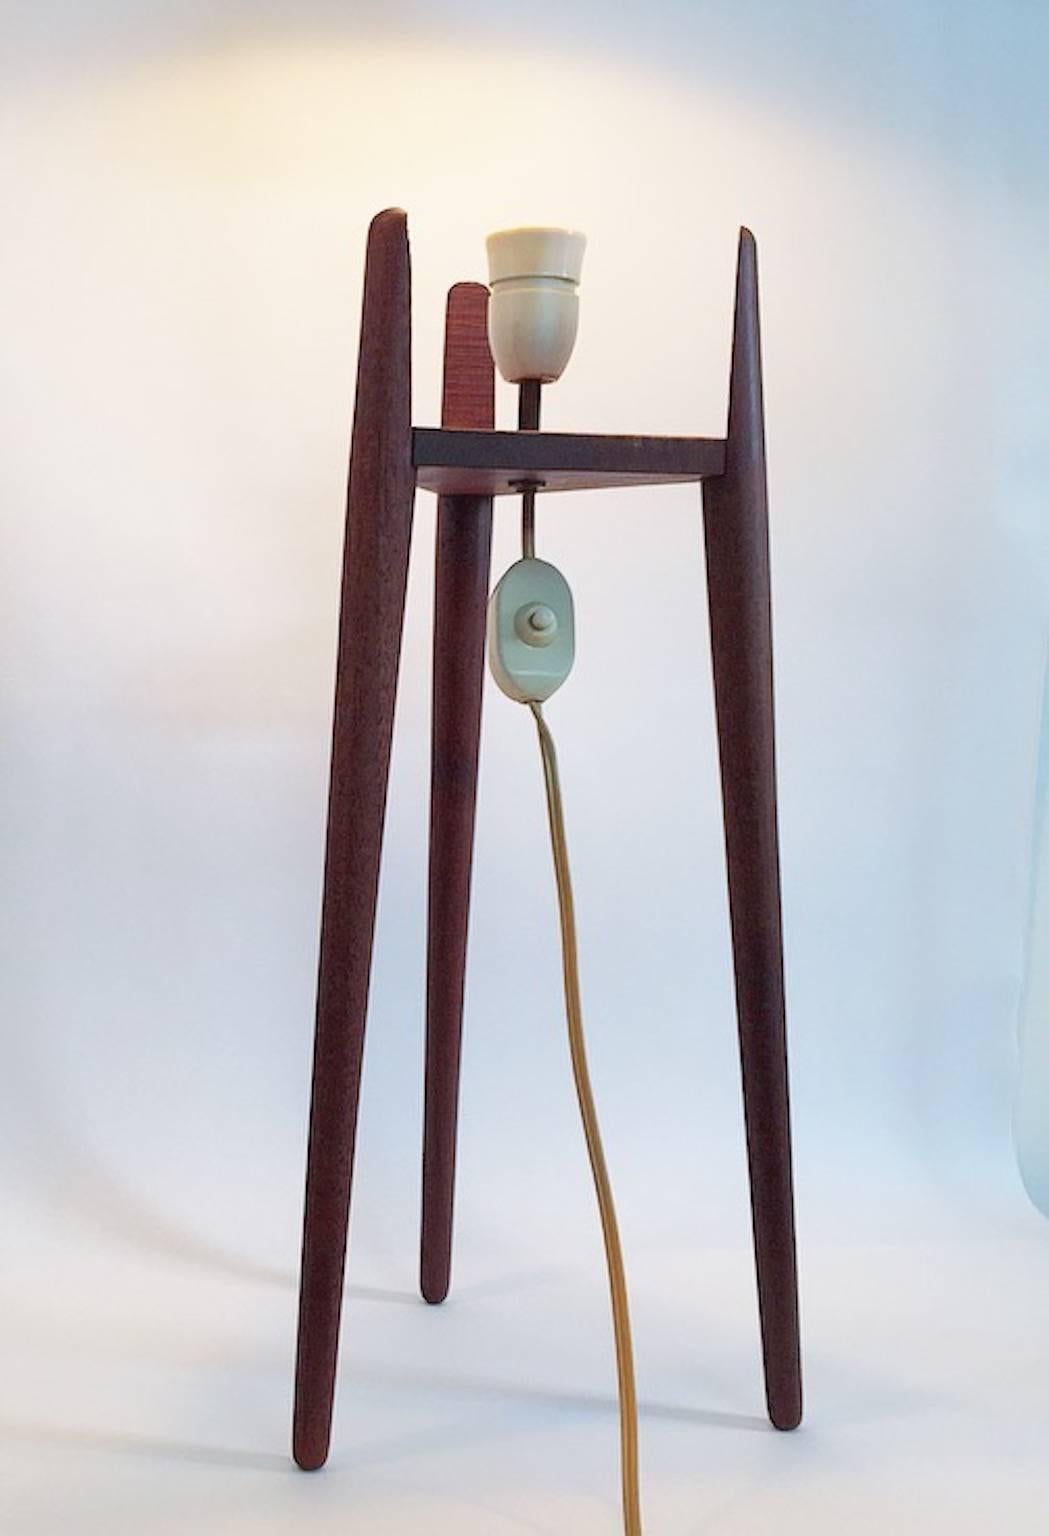 Amazing floor lamp designed in the 1950s with lovely details. The tripod base holds the bulb holder and the original shade. 

The shade is made of celluloid with a woven structure and has beautiful brass details at the bottom and the top. 

The